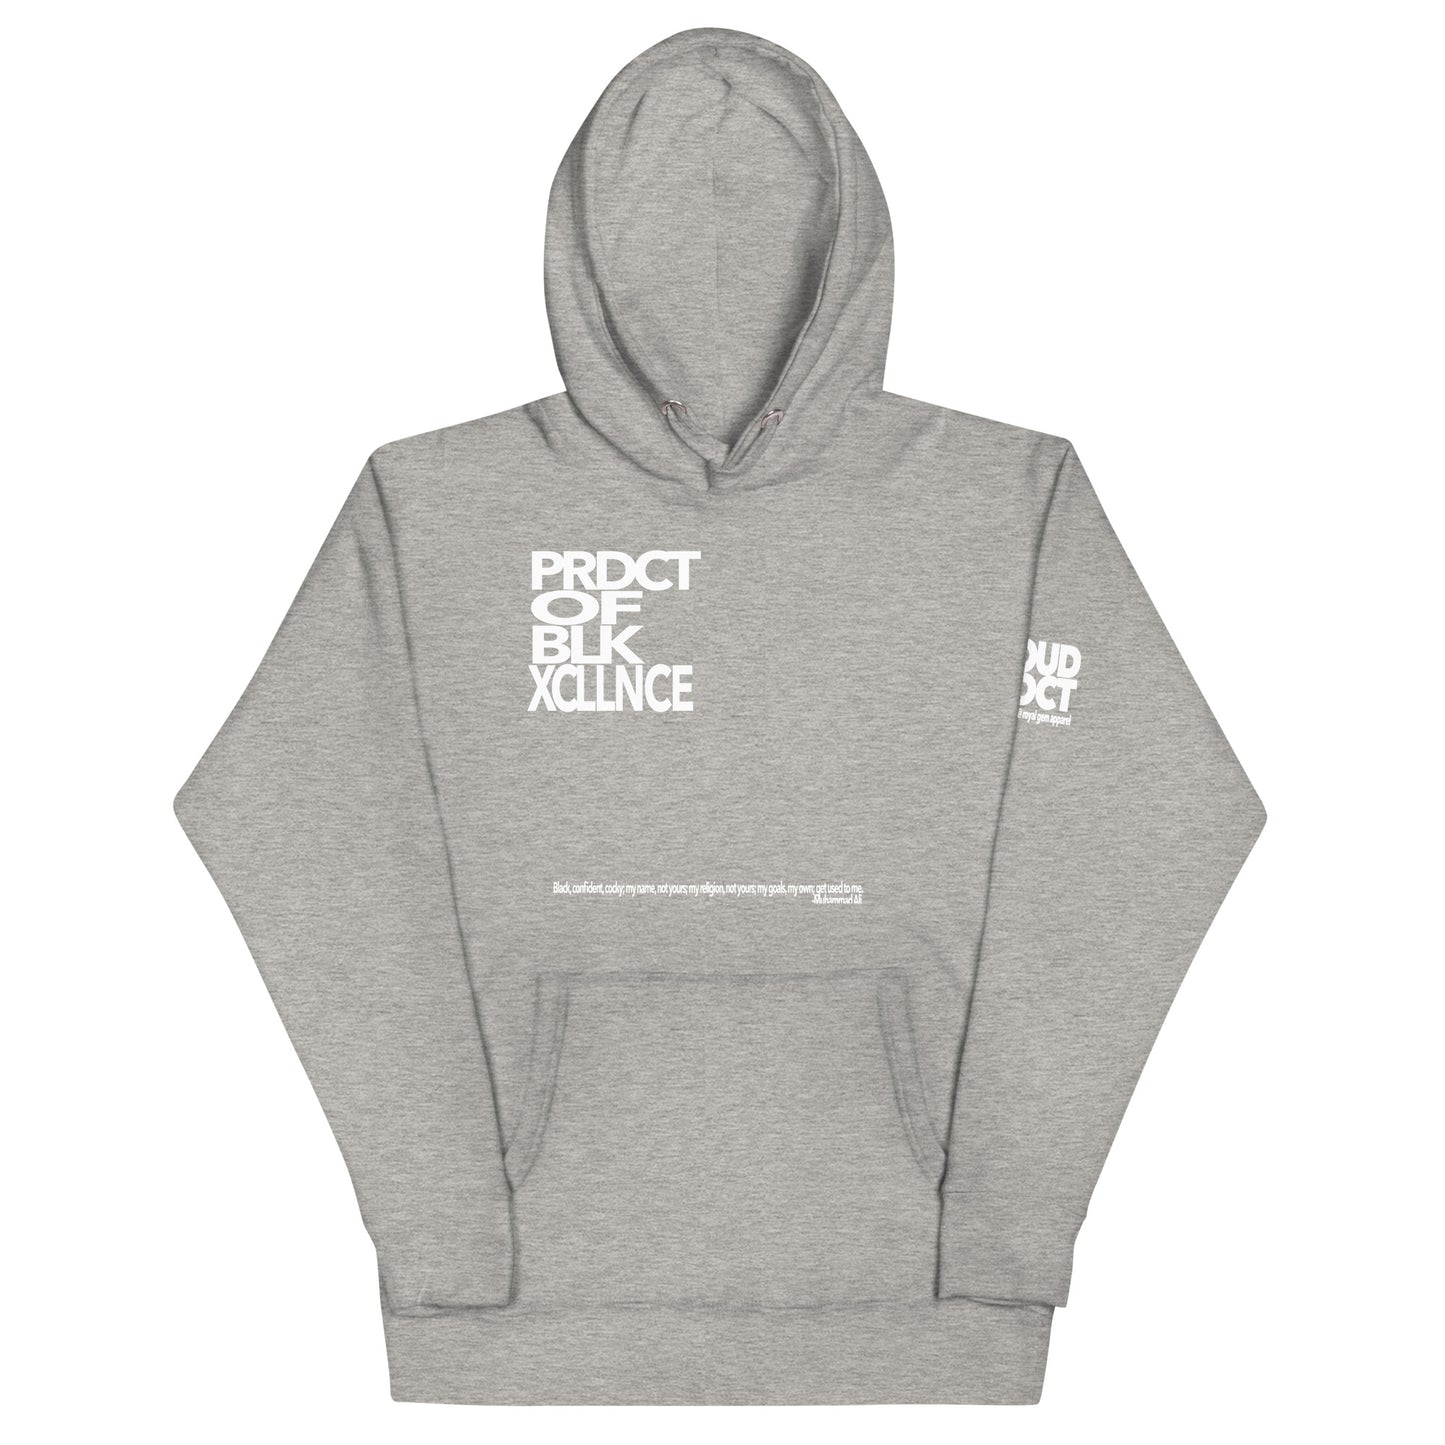 "The Product of Black Excellence" Hoodie